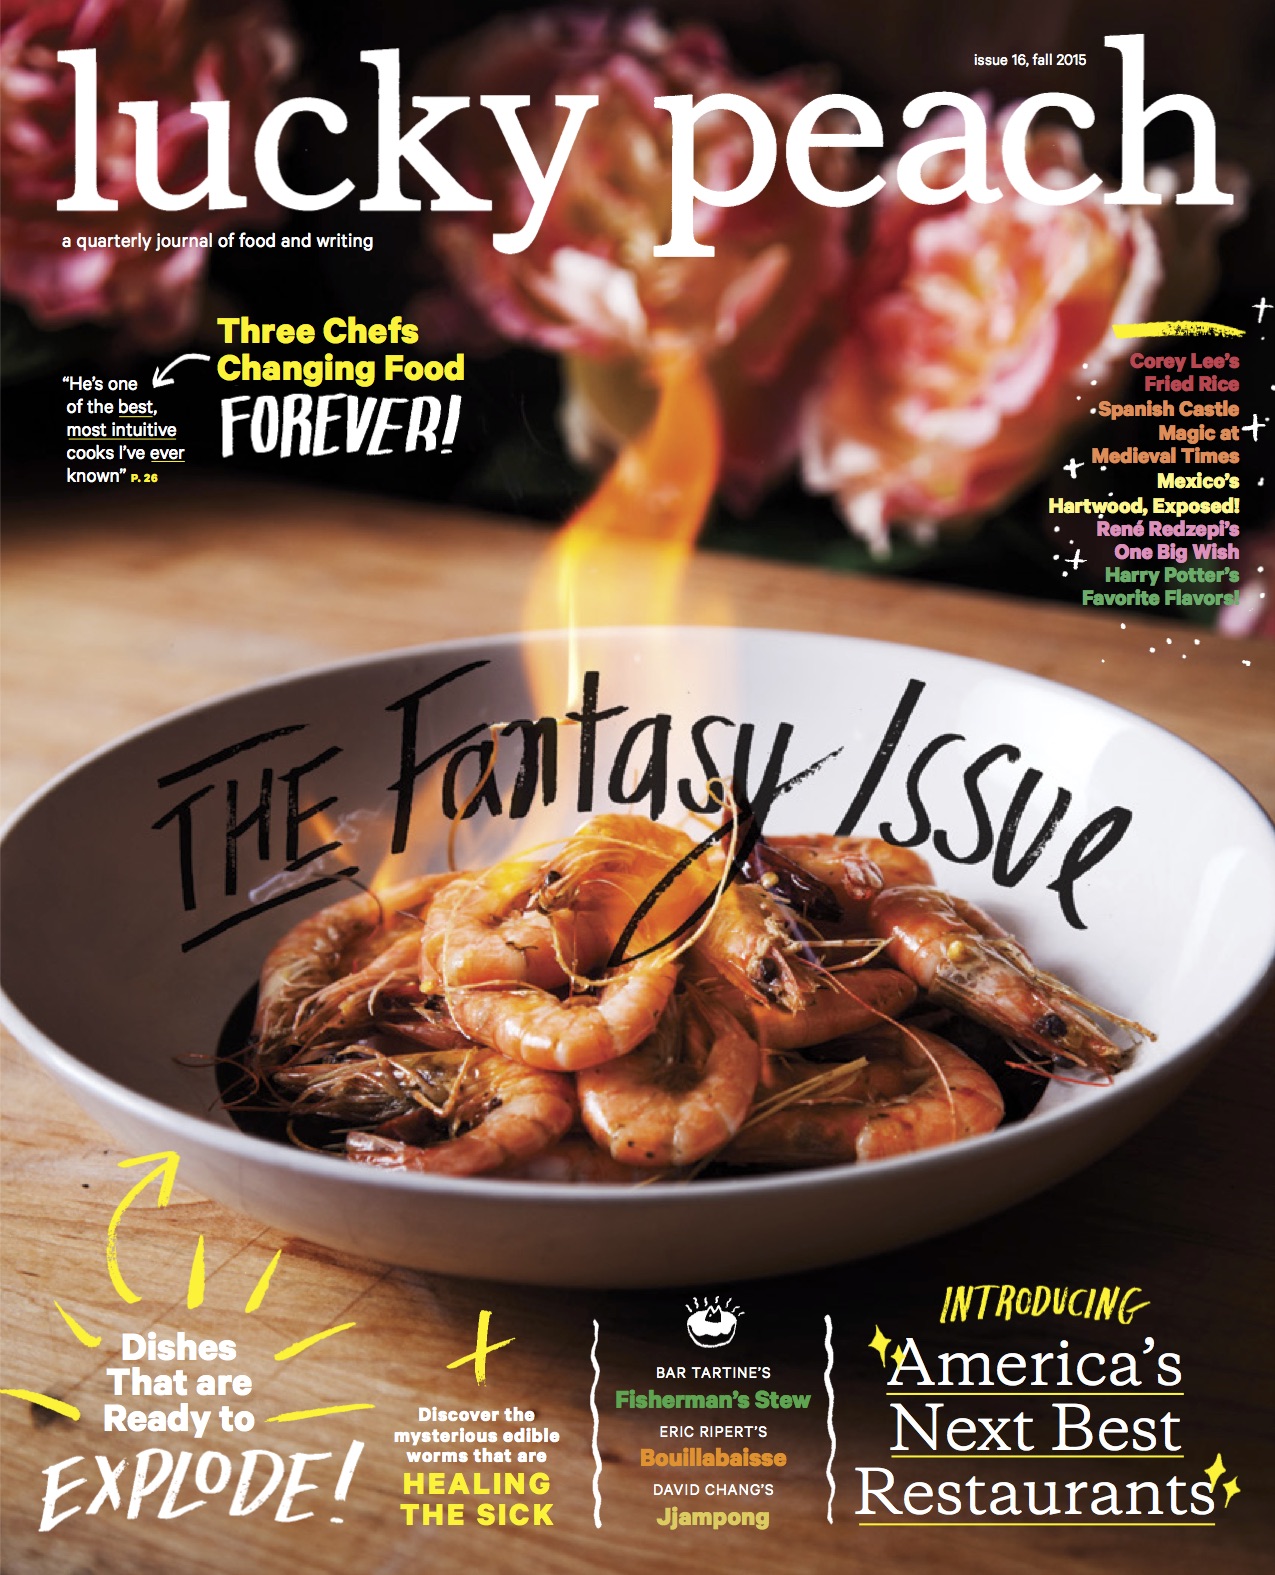 Making the Modern Food Magazine with Lucky Peach